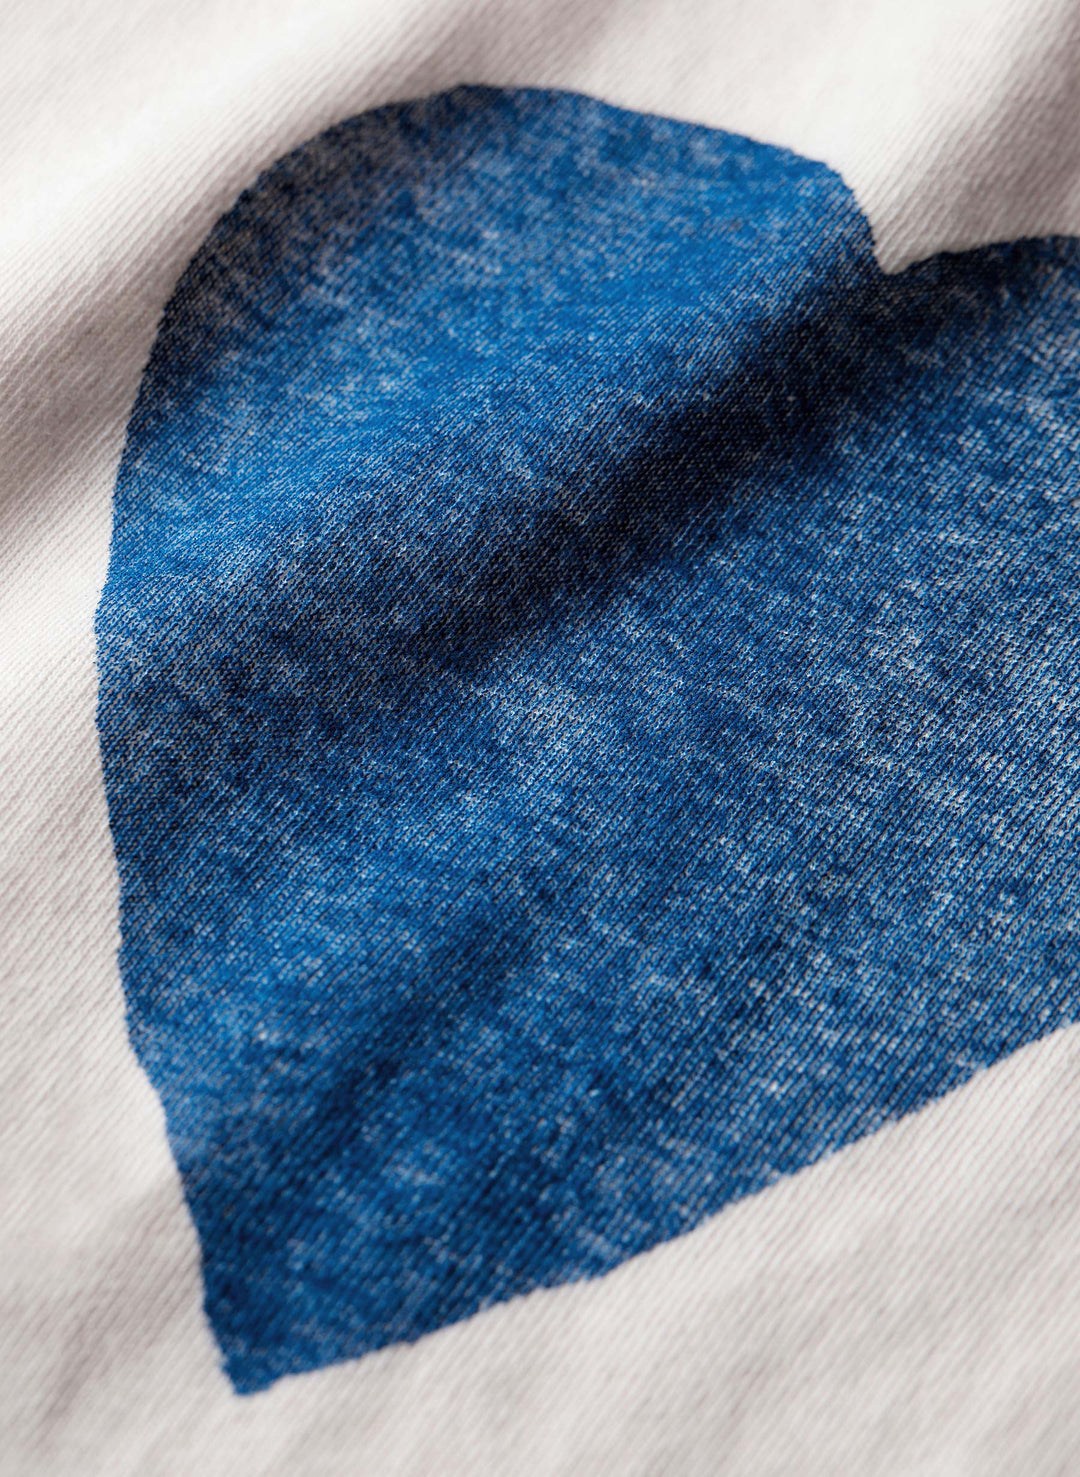 the "heart" tee in blue